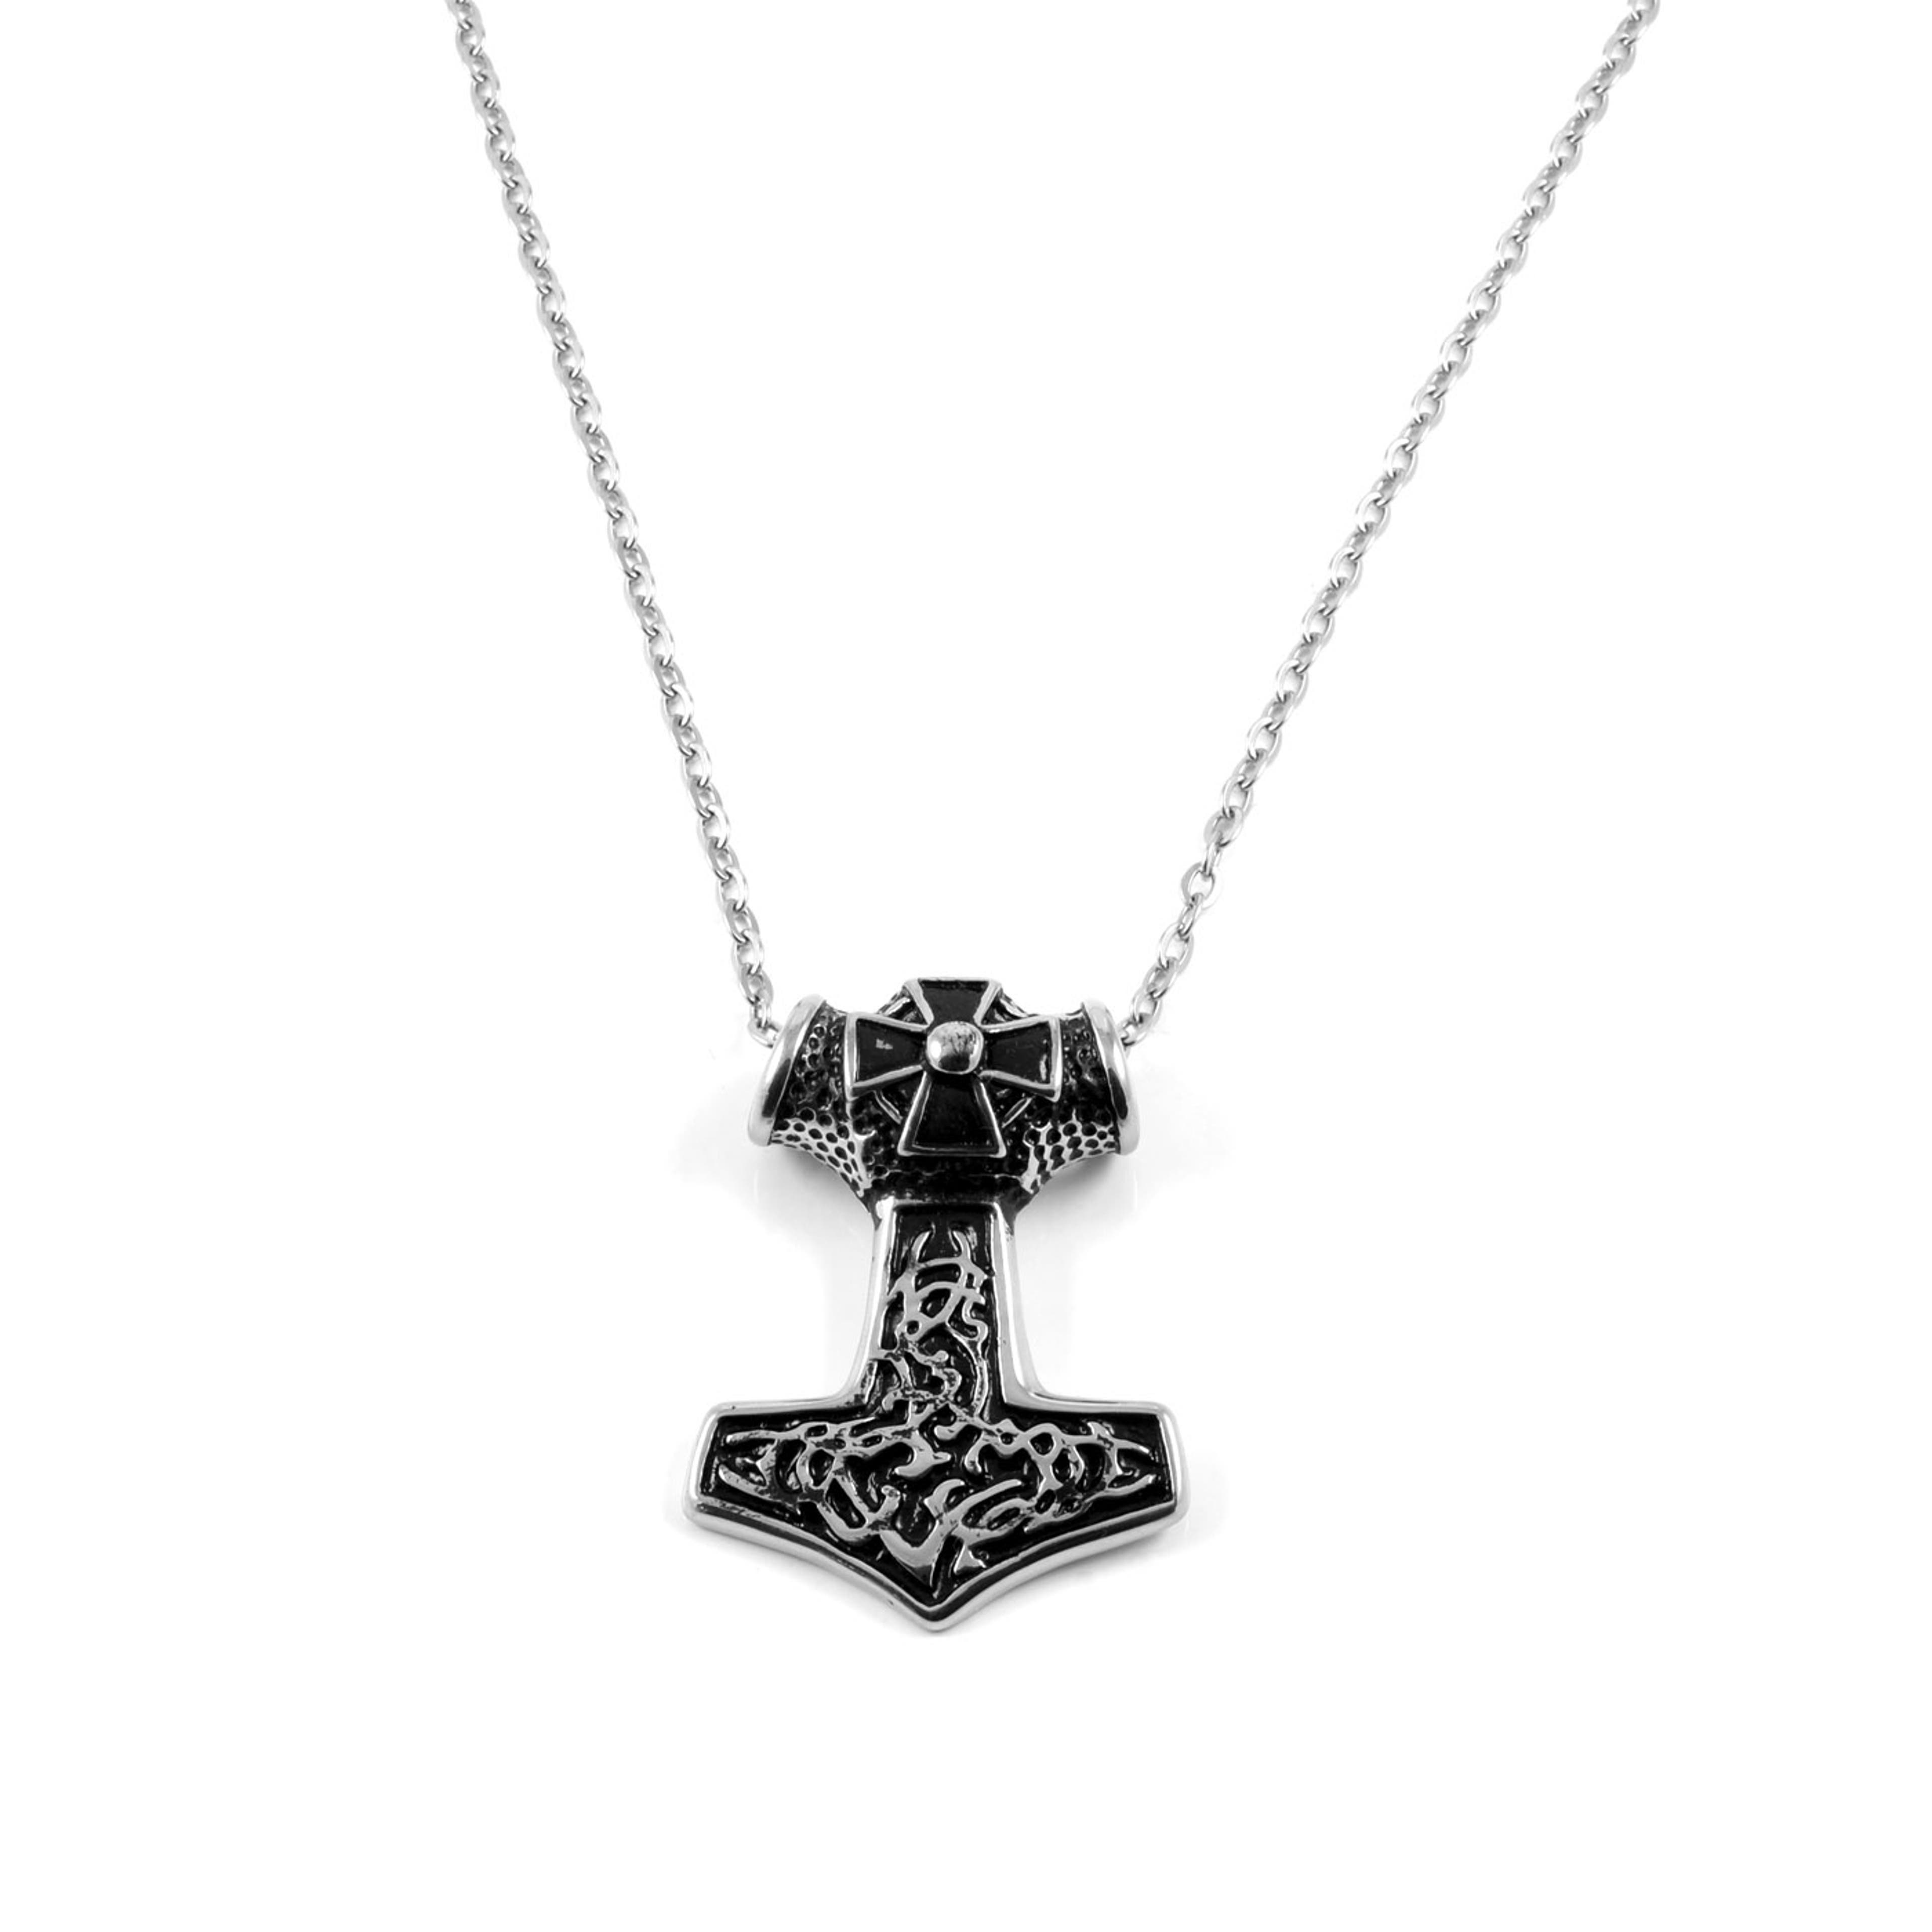 Silver-Tone Stainless Steel XL Thor's Hammer & Cross Cable Chain Necklace